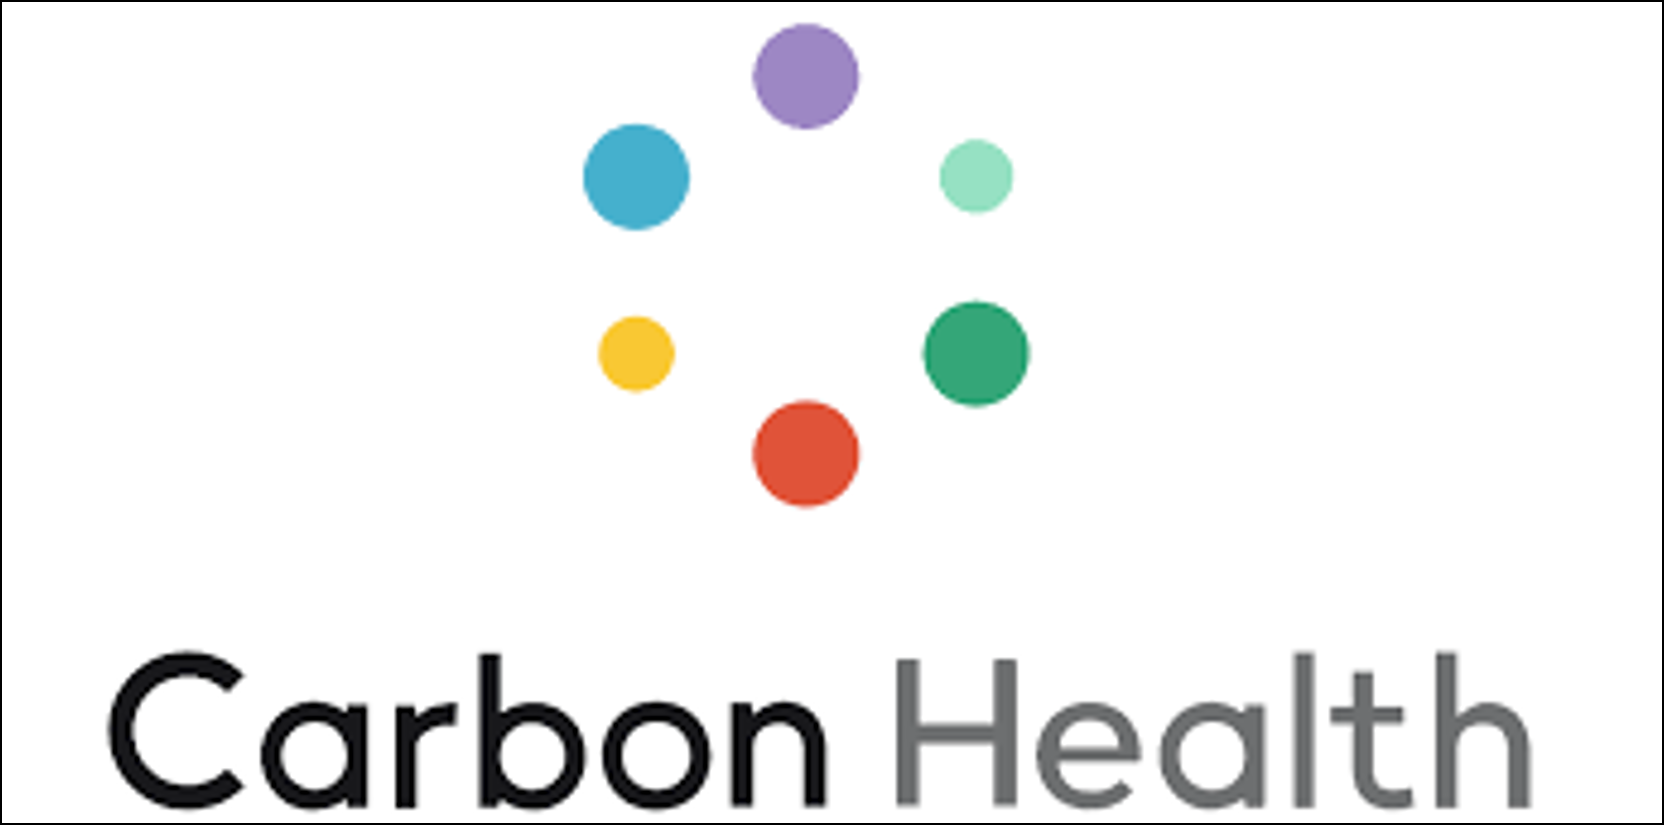 Carbon Health transforms healthcare by introducing AI charting into its Electronic Health Records (EHR) platform.